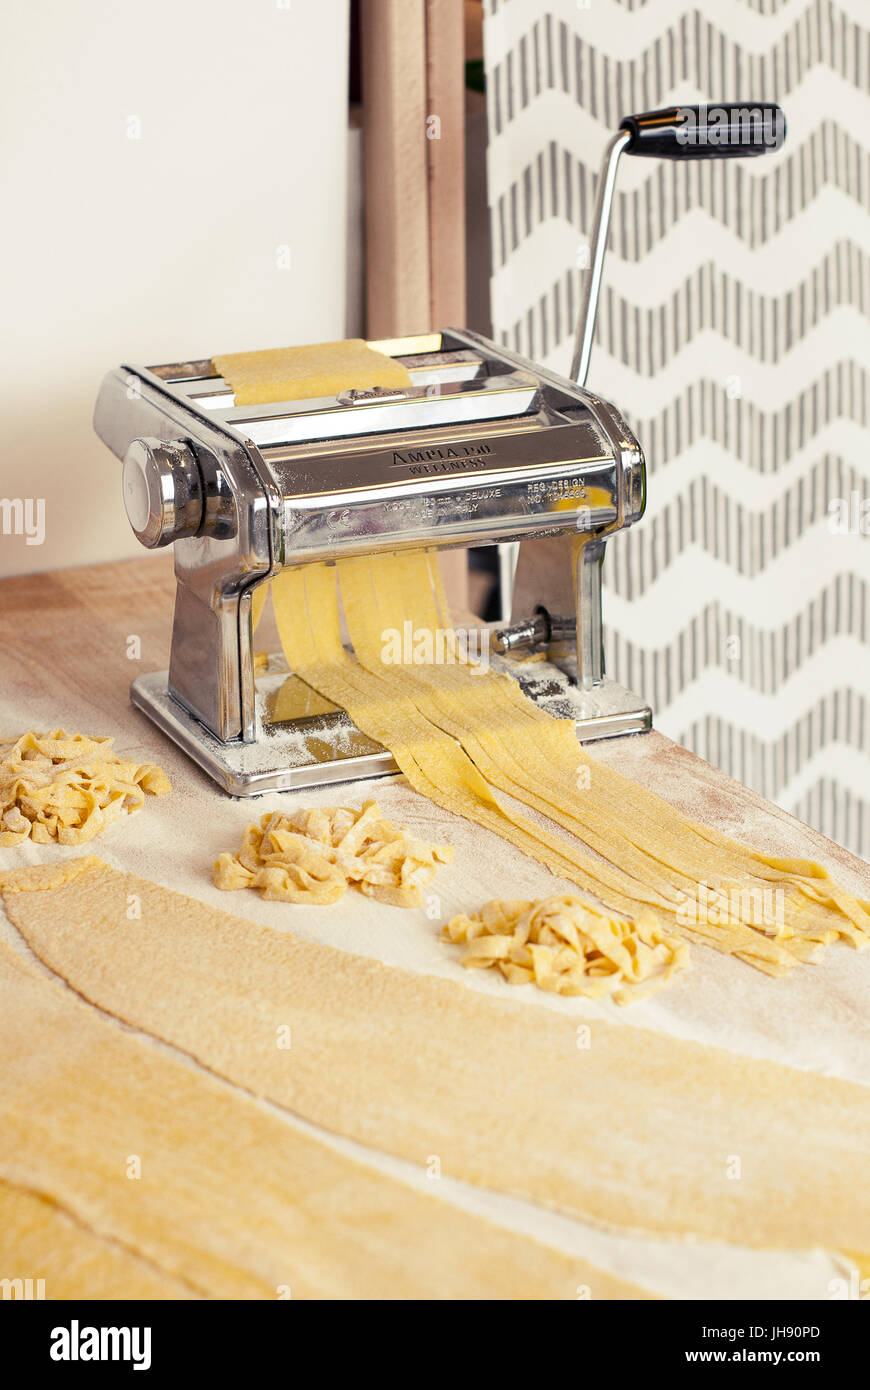 https://c8.alamy.com/comp/JH90PD/homemade-pasta-with-eggs-made-on-a-pasta-maker-it-has-enogh-room-on-JH90PD.jpg